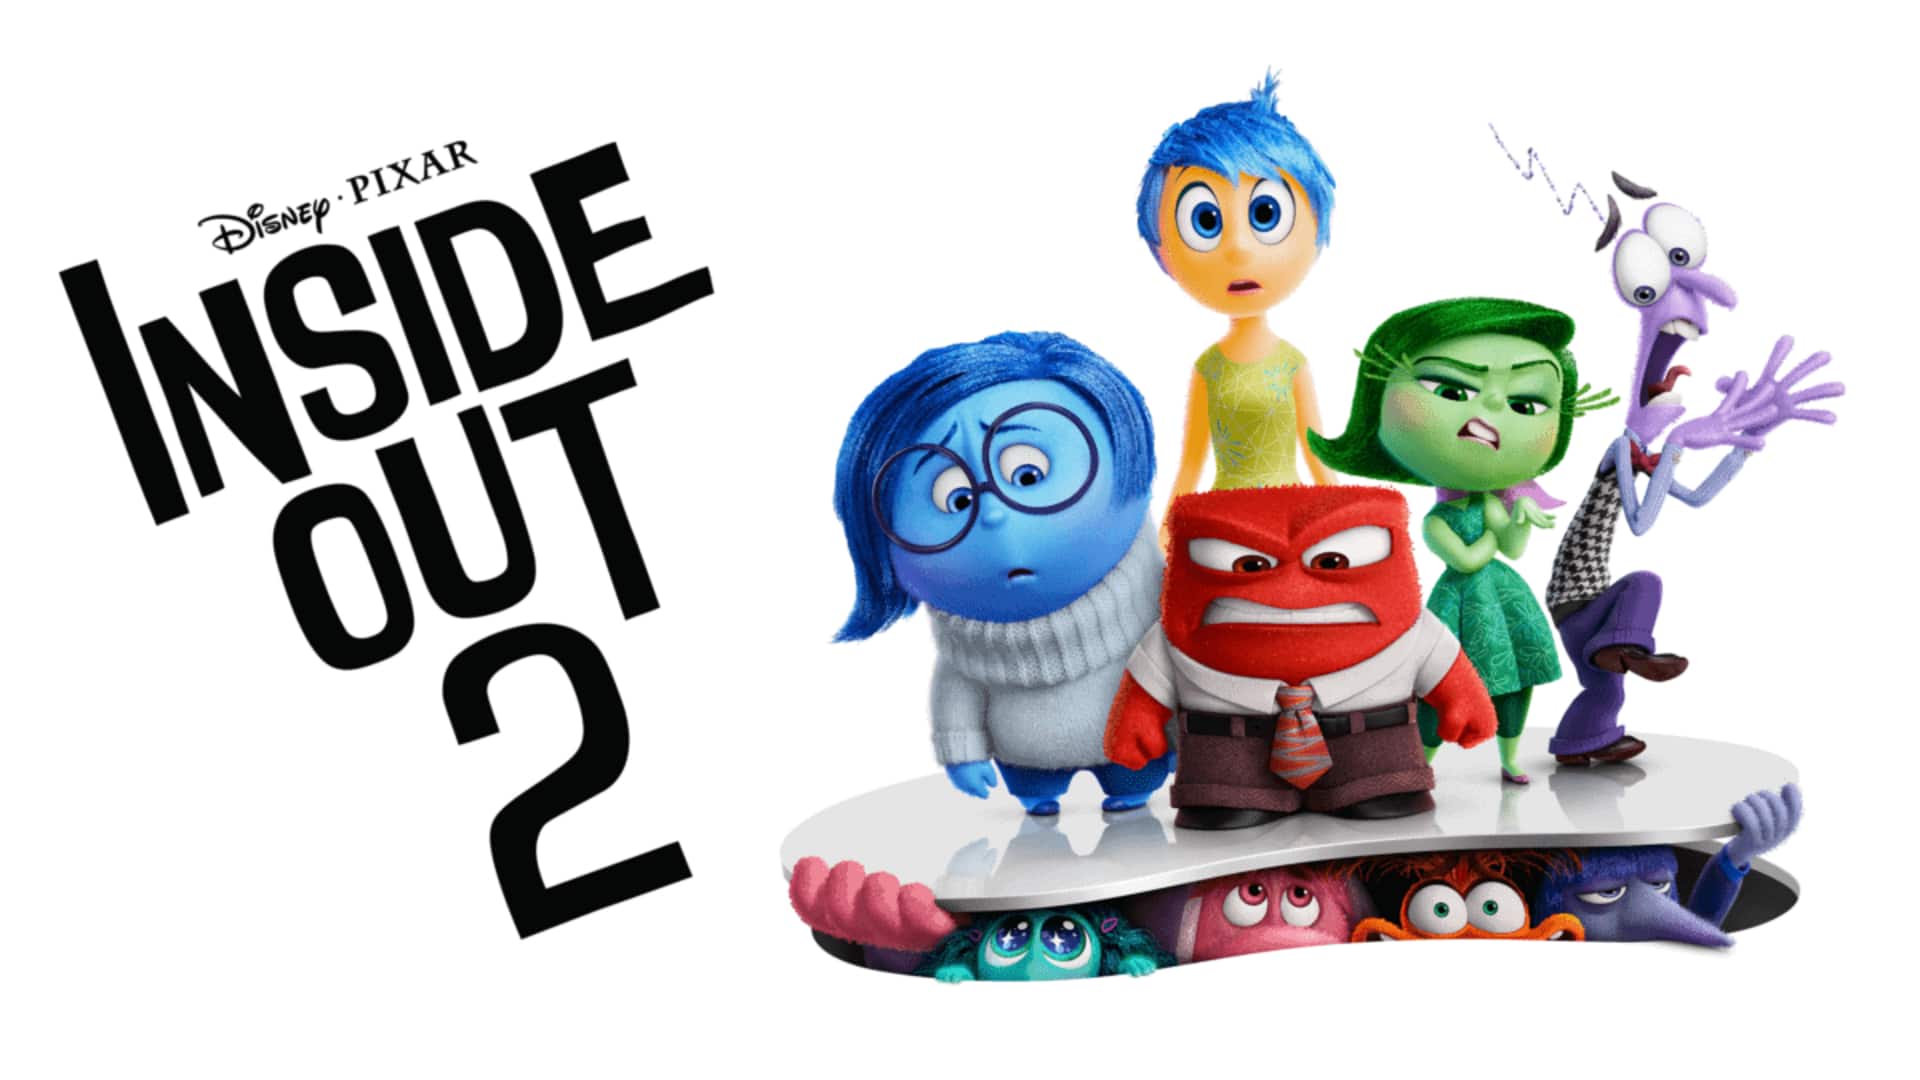 'Inside Out 2': Release date, cast, and trailer are revealed